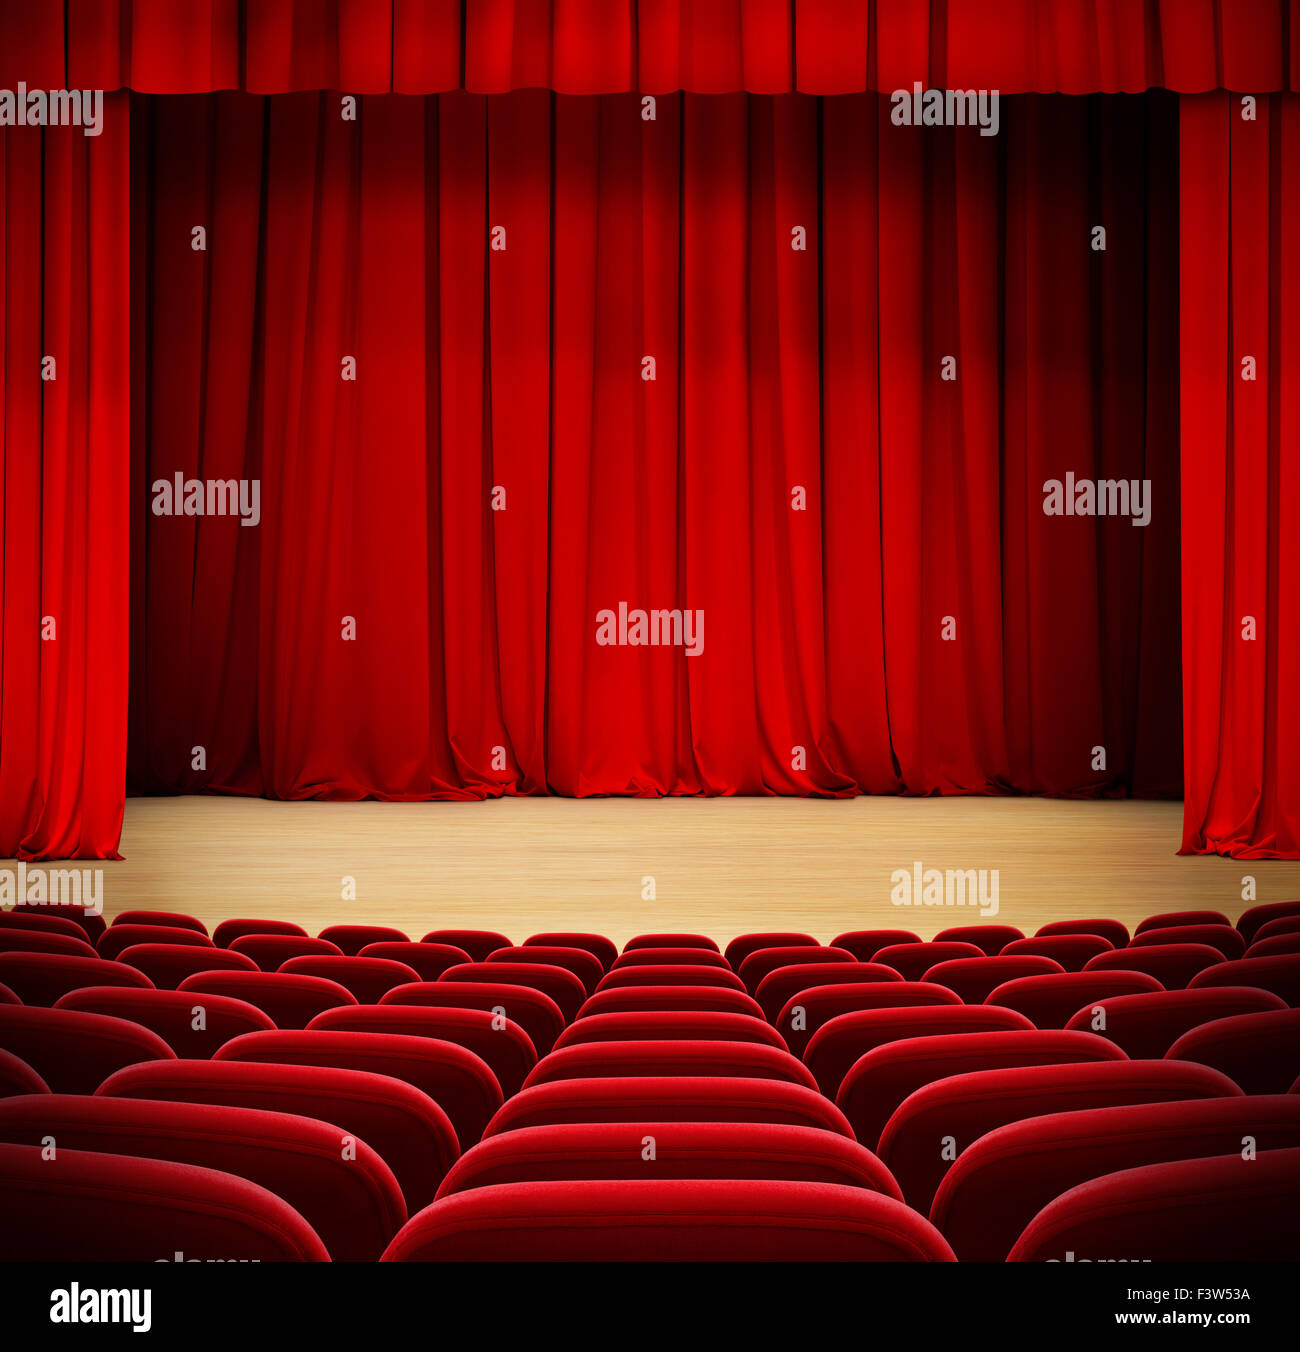 red curtain on theater wood stage with red velvet seats Stock Photo - Alamy